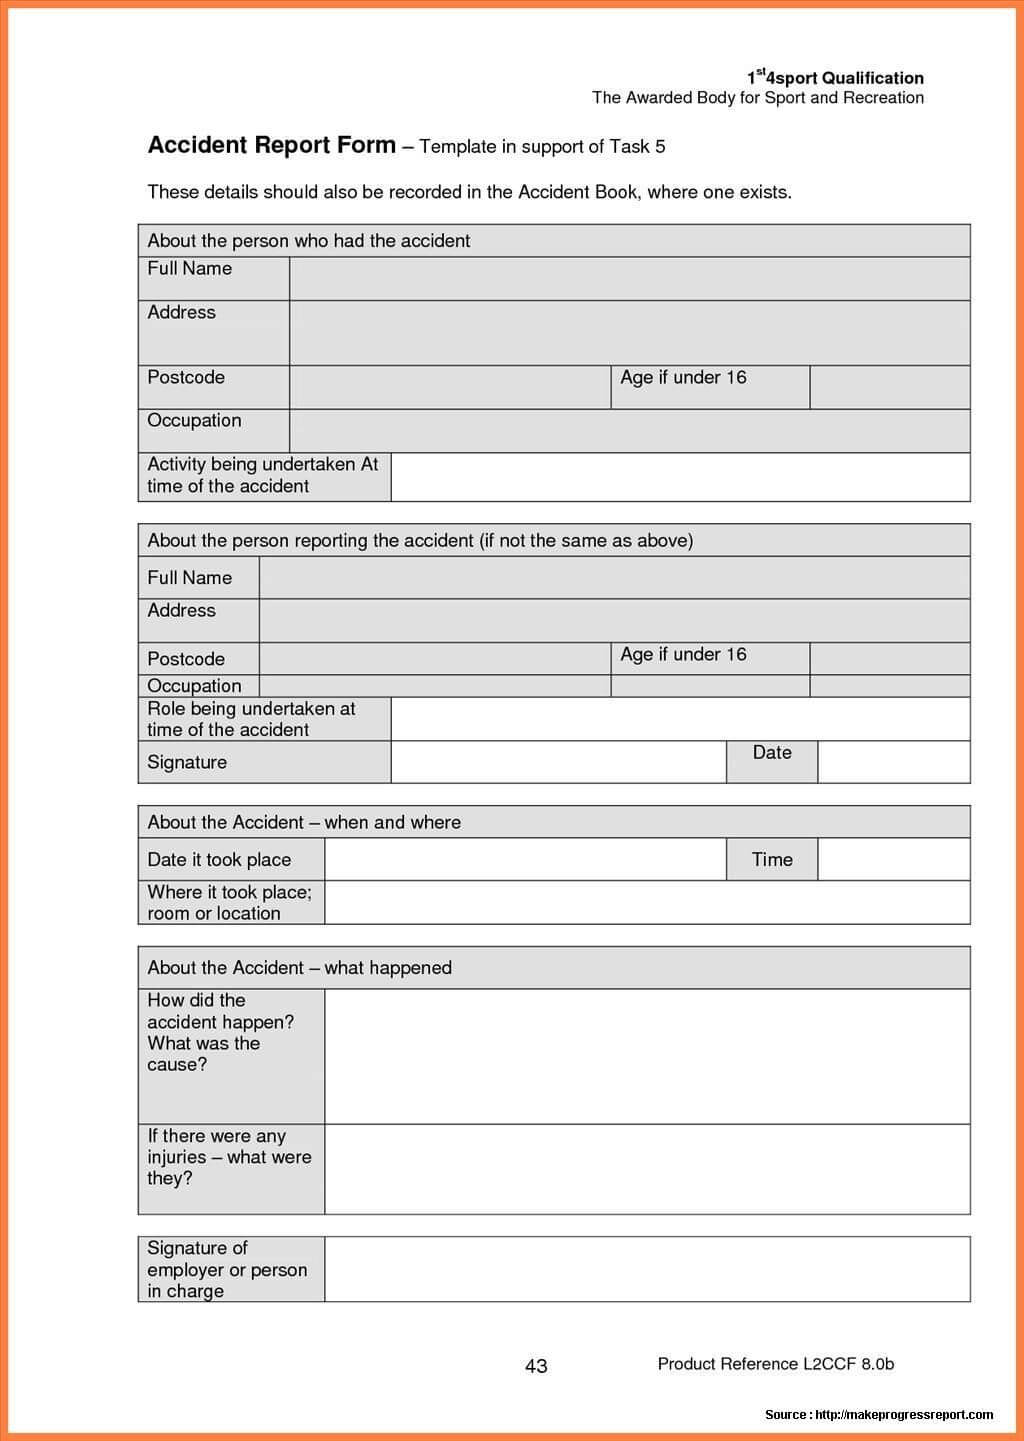 Employee Incident Report Is Your Company In Need For An Throughout Incident Report Form Template Qld